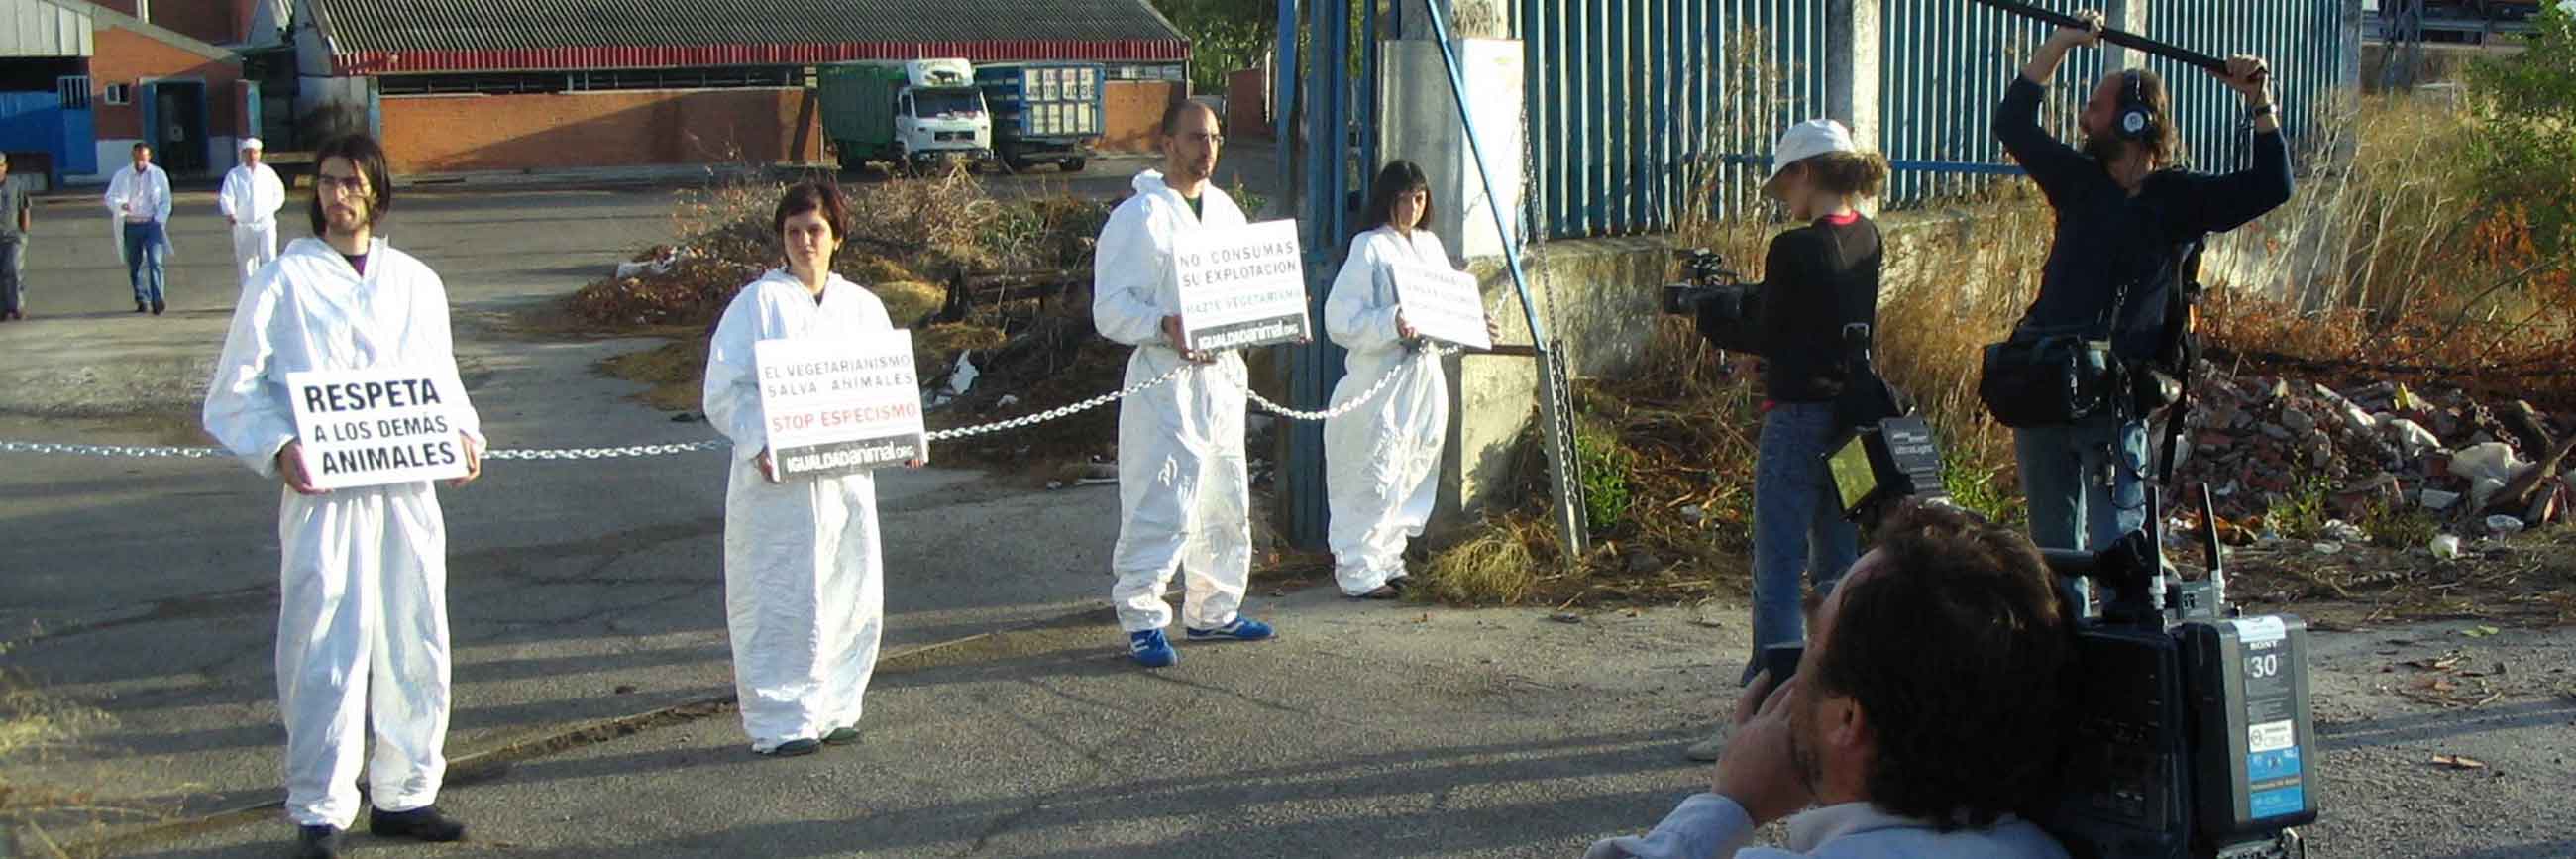 Protest in front of factory farm in Spain 2006